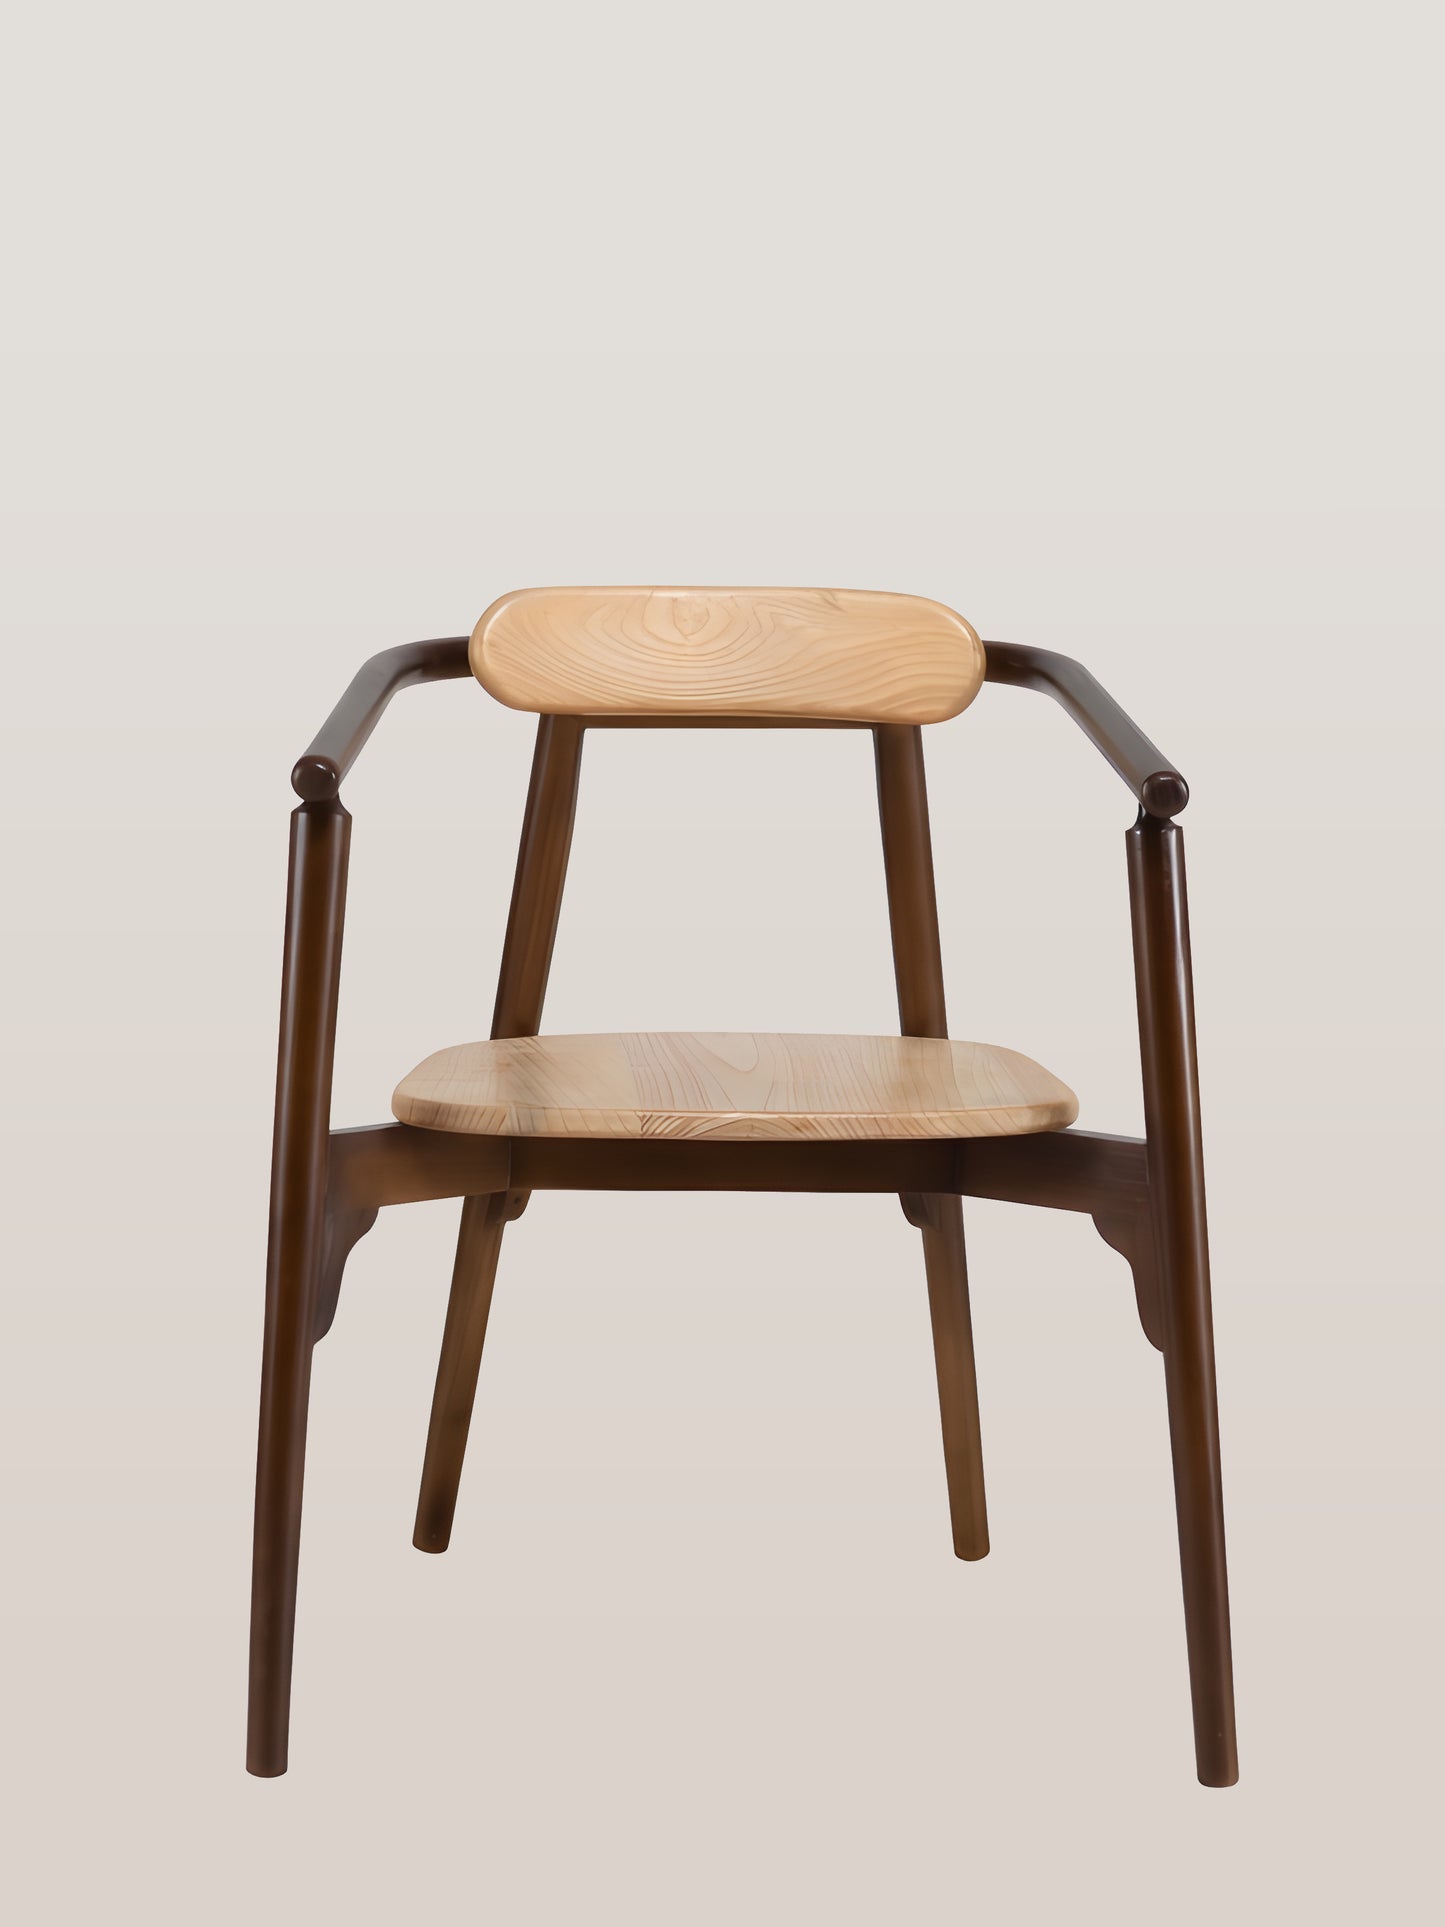 Ibanez Sungkai Wood Dining Chair with painted brown armrest and legs front view by Mellowdays Furniture